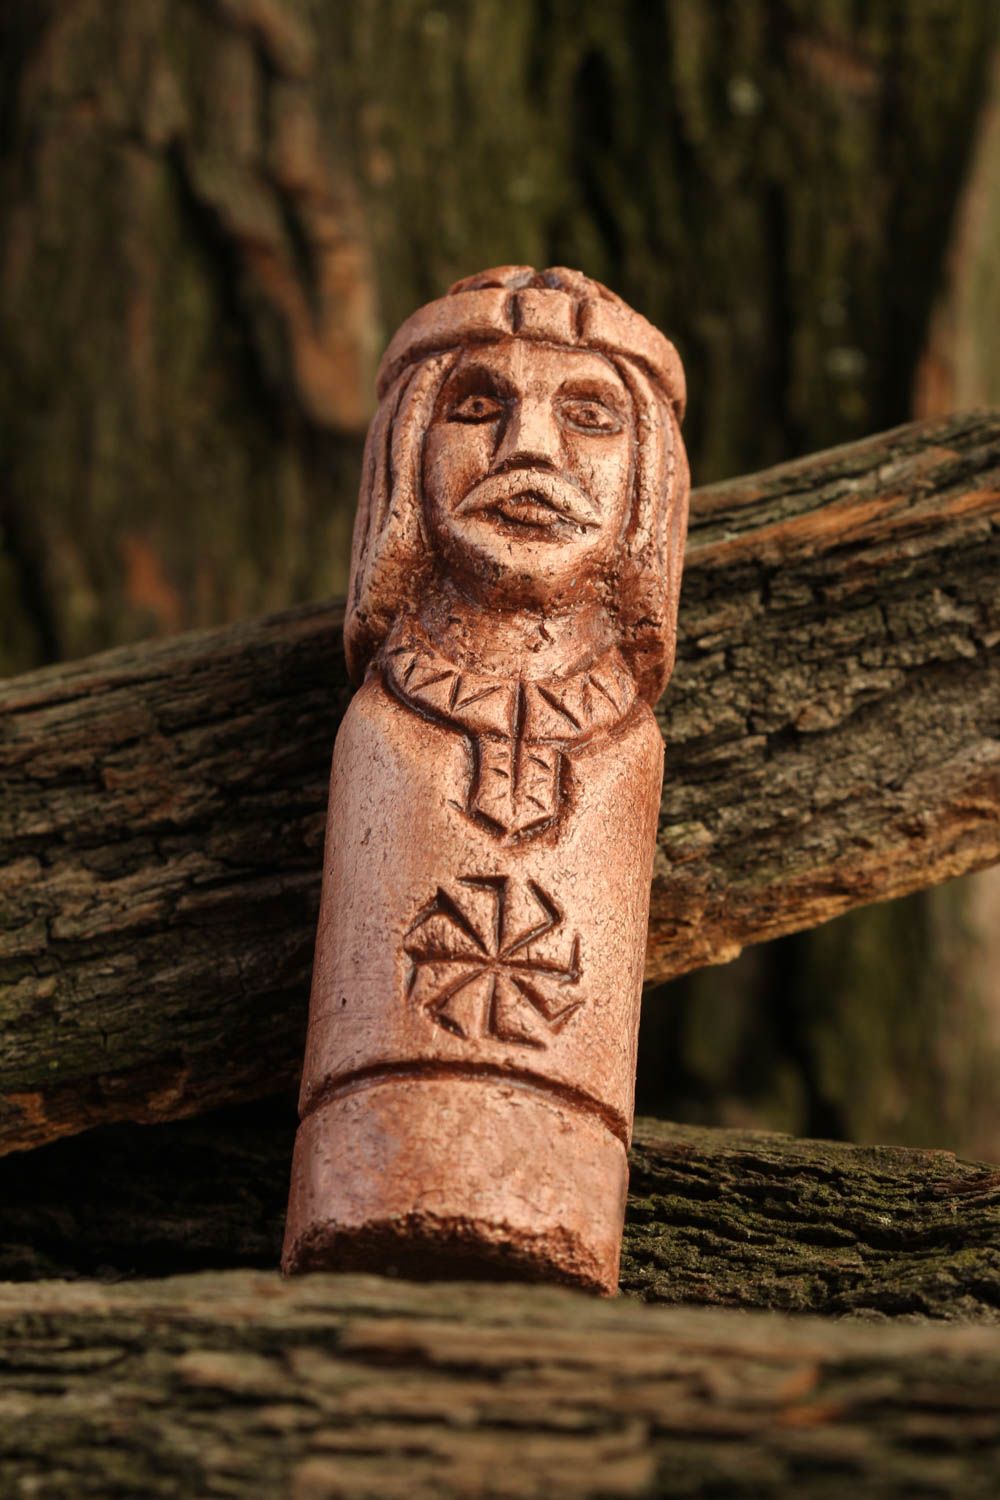 Handmade Slavic amulet unusual home decor decorative use only clay statuette photo 1